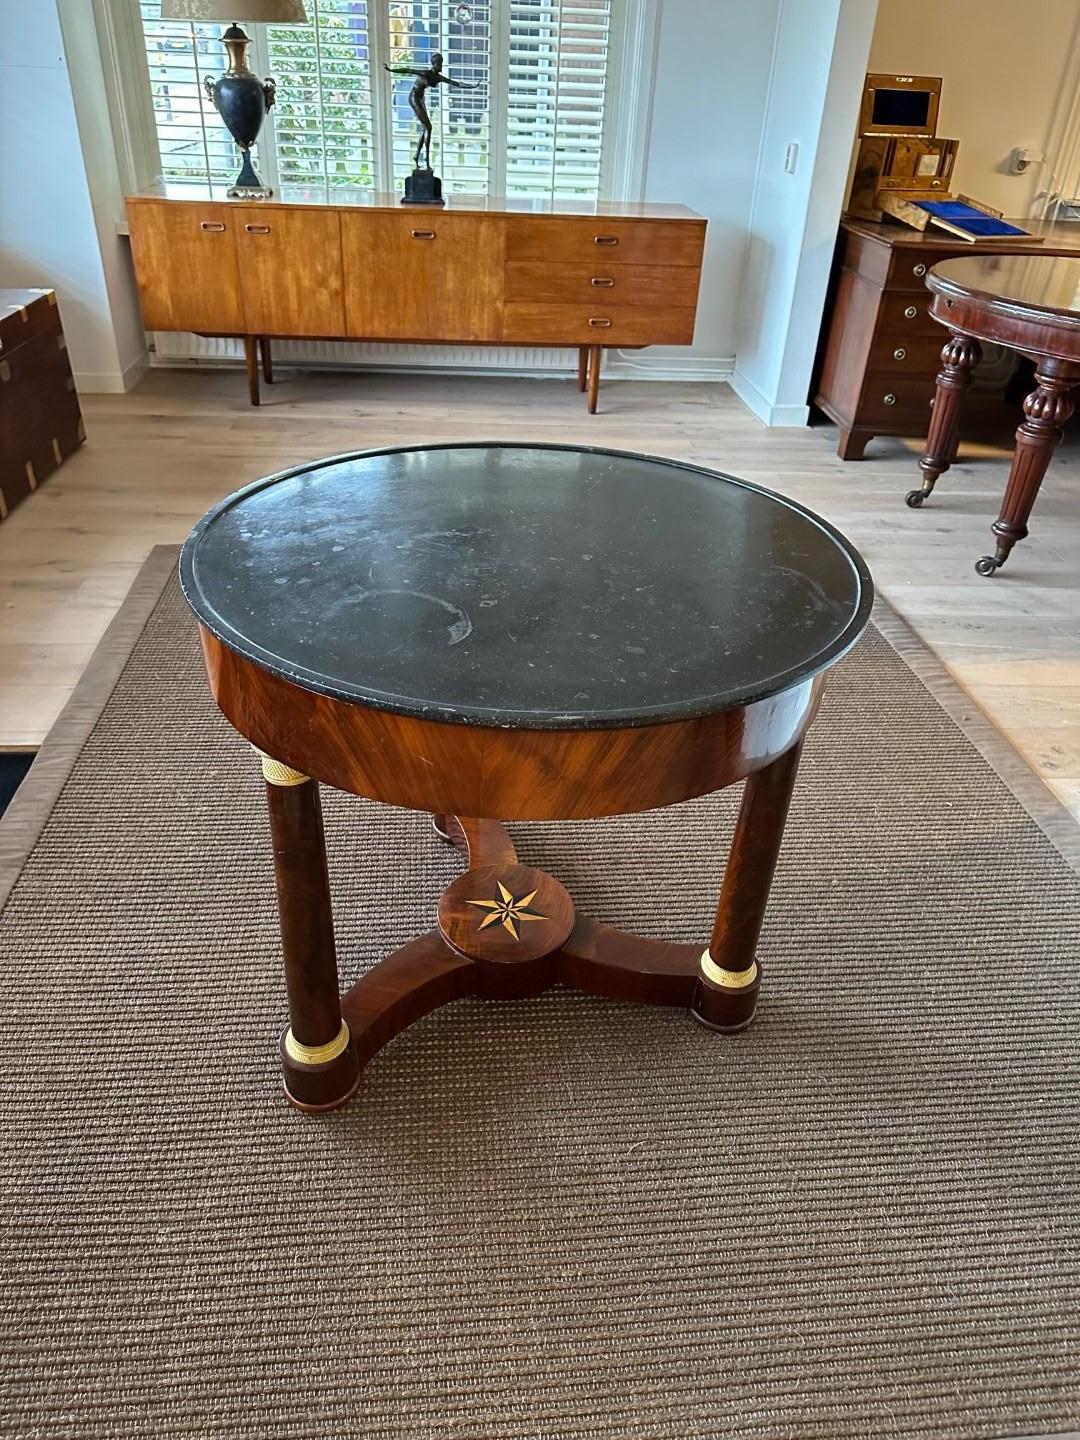 Antique empire table. Beautiful table with ormolu-plated column pedestals and natural stone top. The turned base has inlay work in the shape of a star. Completely in very good condition. Beautiful to use as a hall table or side table.

Origin: